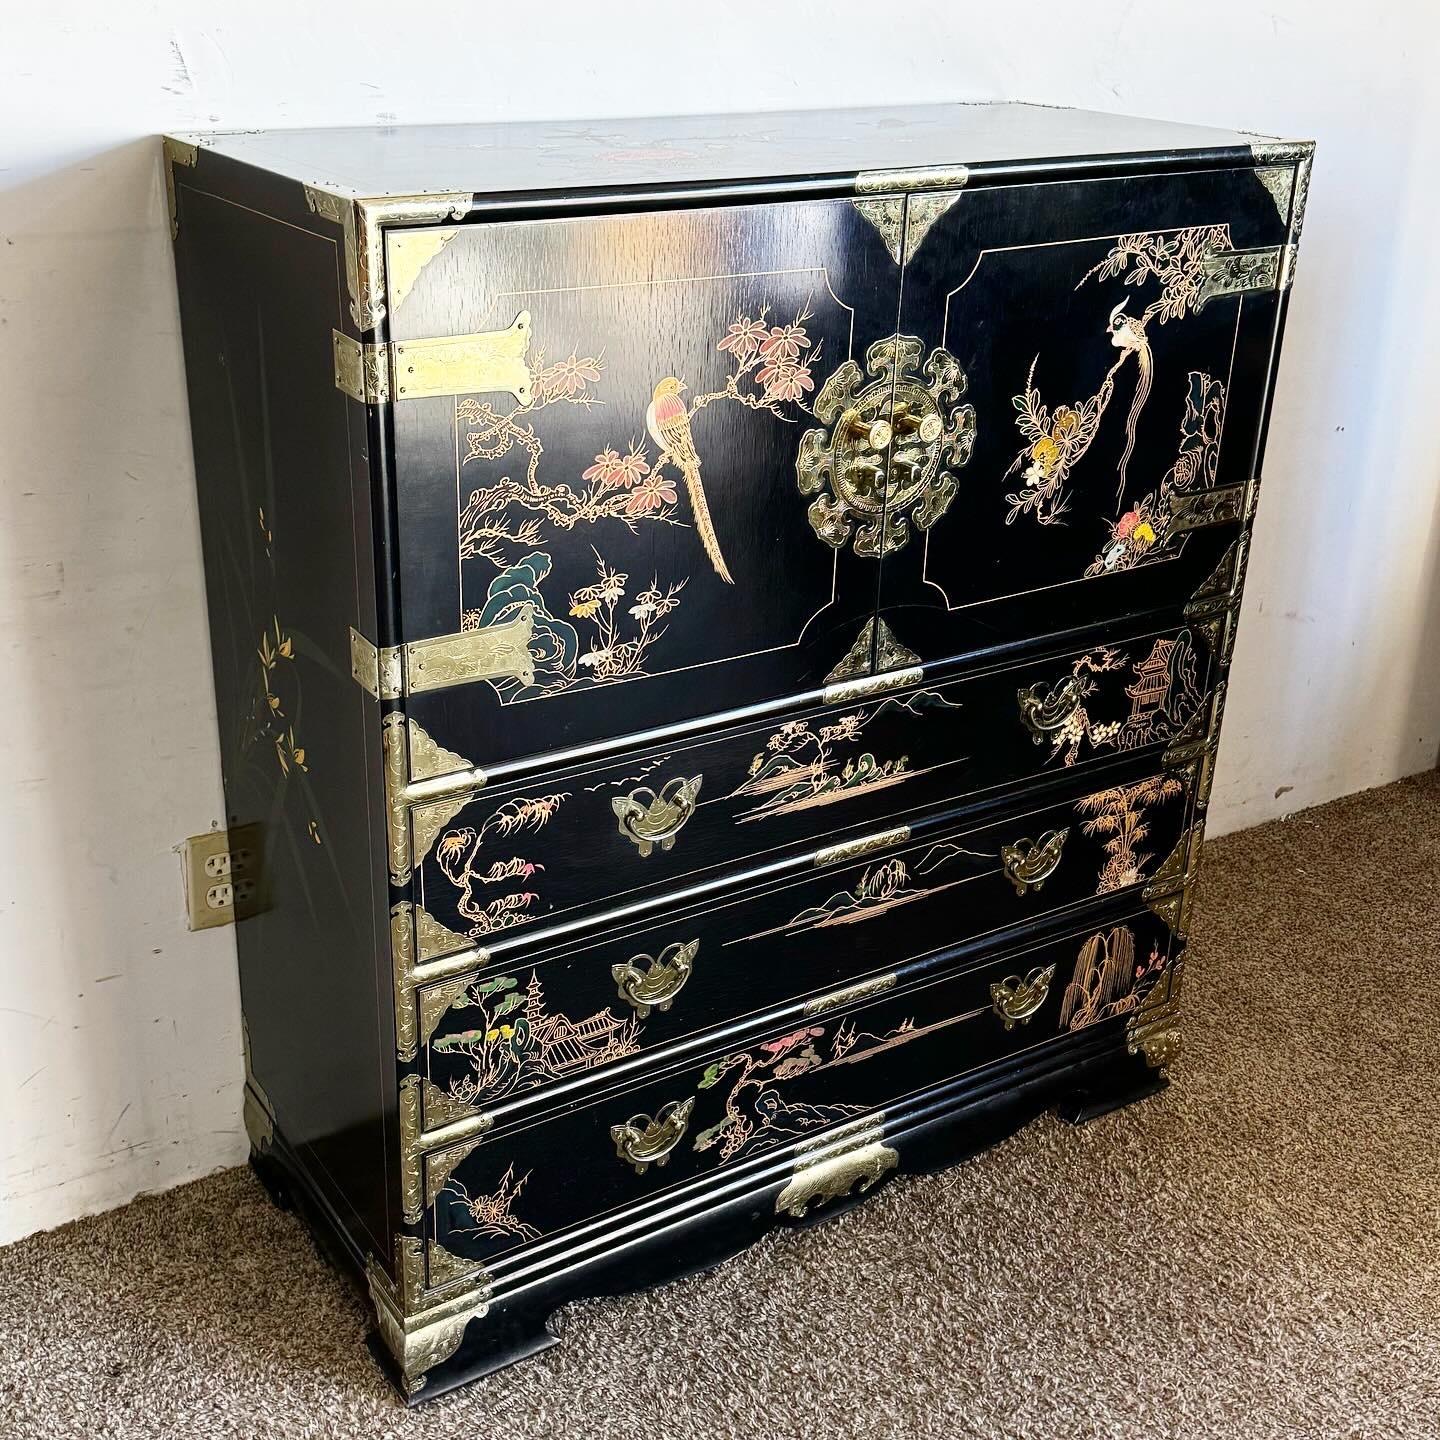 Embrace the elegance of Chinese craftsmanship with this Black and Gold Hand Painted Armoire/Chest of Drawers. Featuring a classic black background with exquisite gold hand-painted motifs, this piece marries functionality with artistry. Ideal for